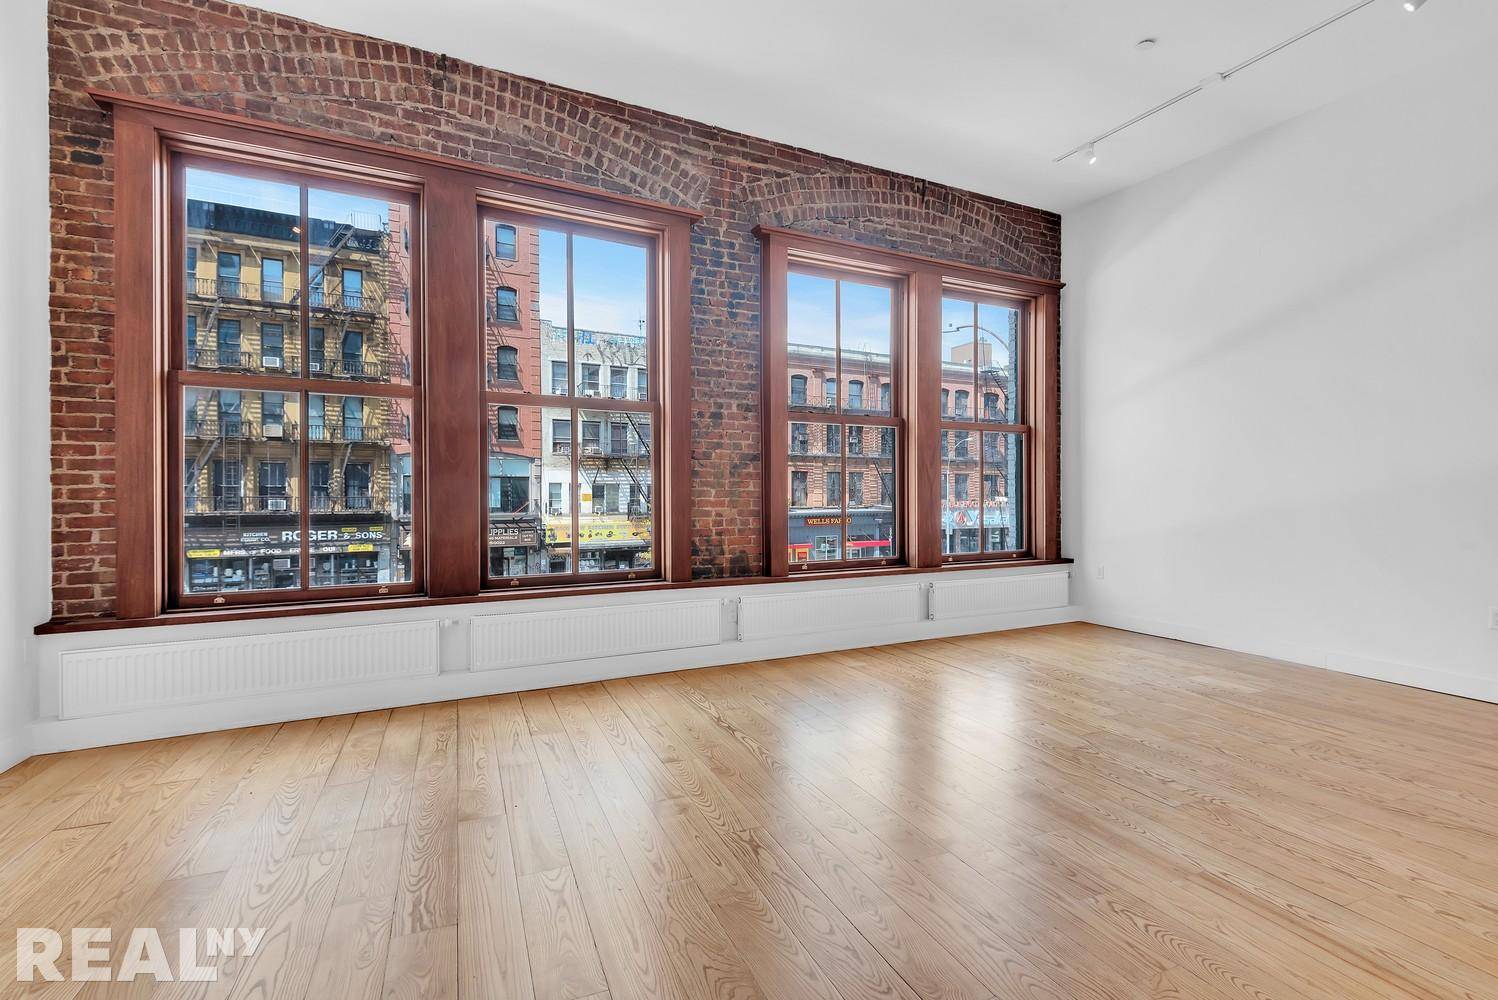 Enter your dream loft on the Lower East side with oversized windows and an expansive living room made to create the perfect environment to relax at home.